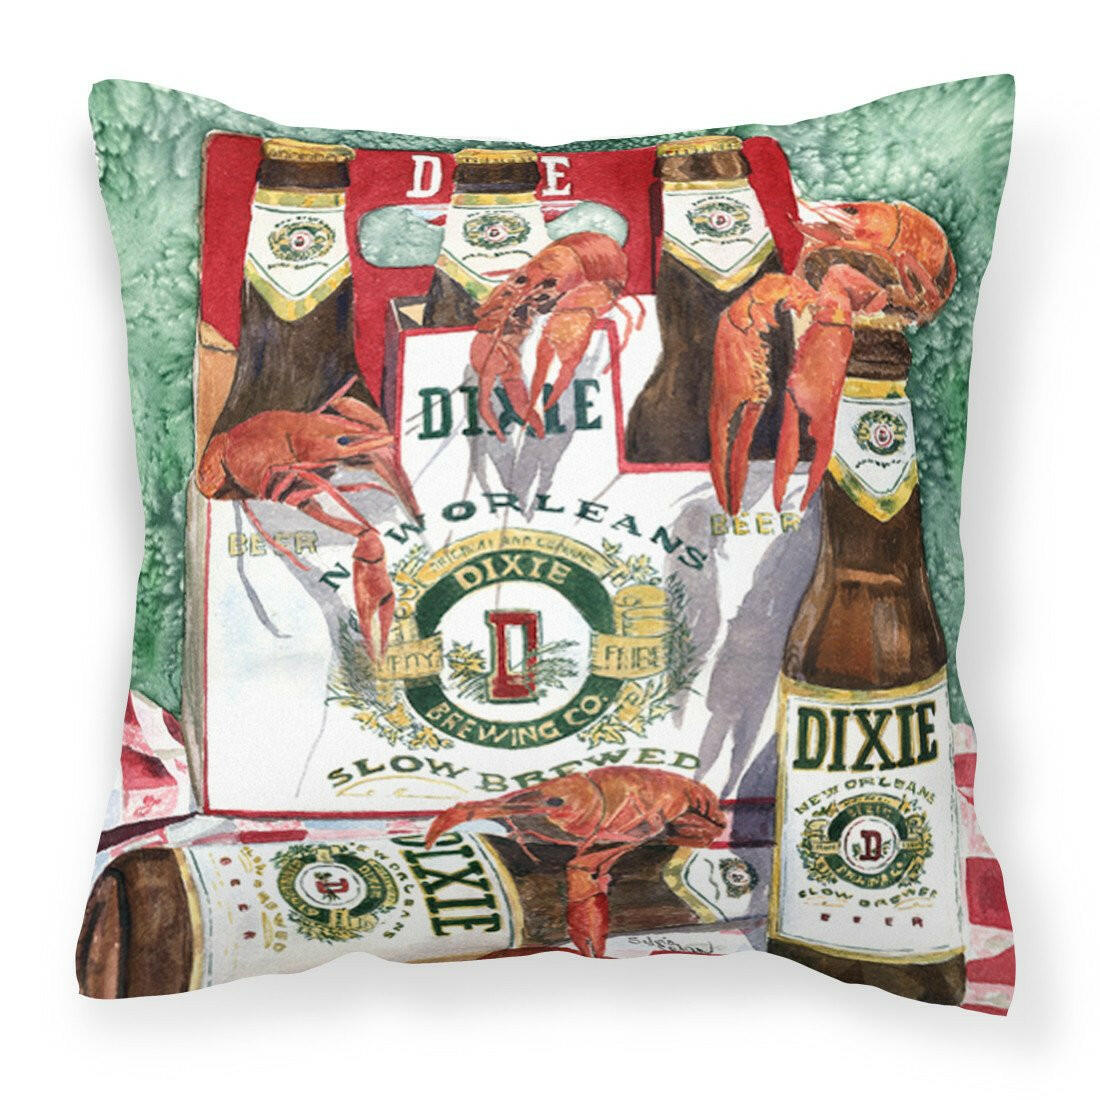 Dixie Beer and Crawfish New Orleans Fabric Decorative Pillow 8541PW1414 - the-store.com